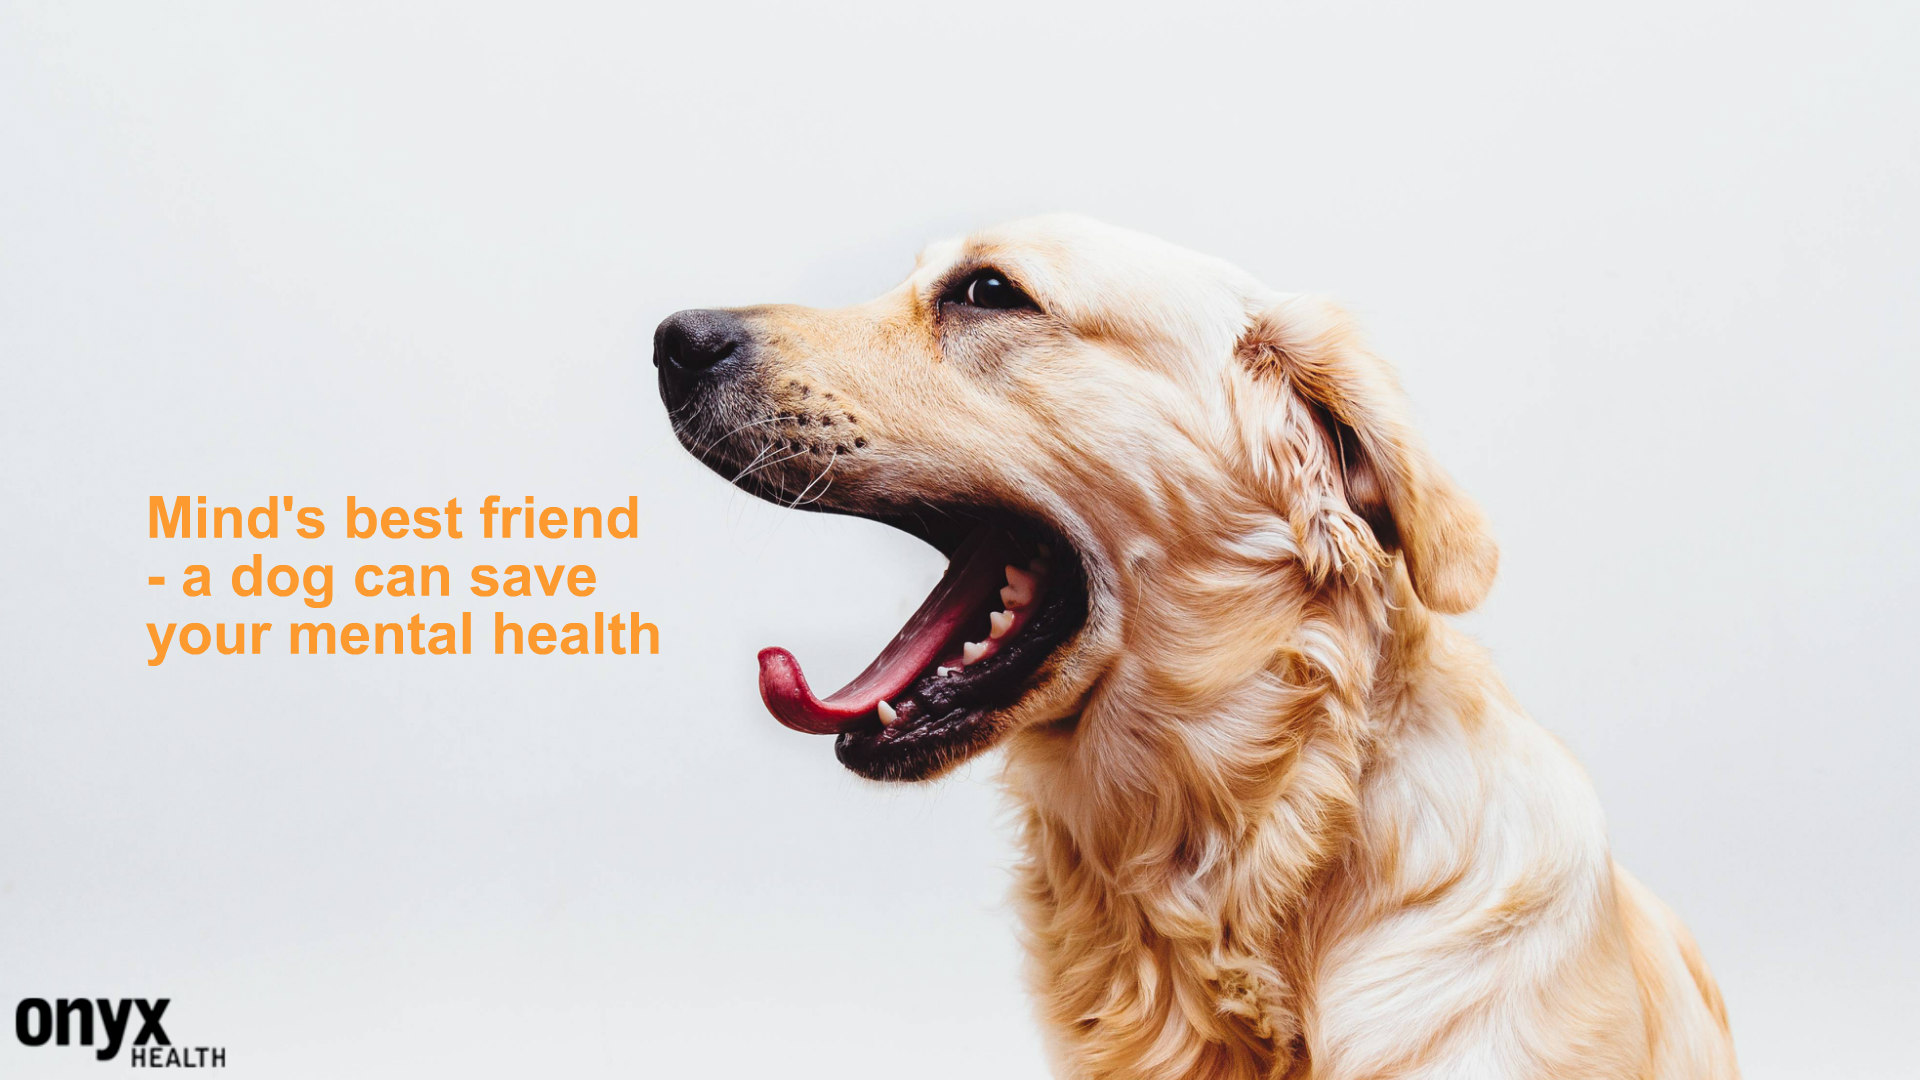 A dog can save your mental health